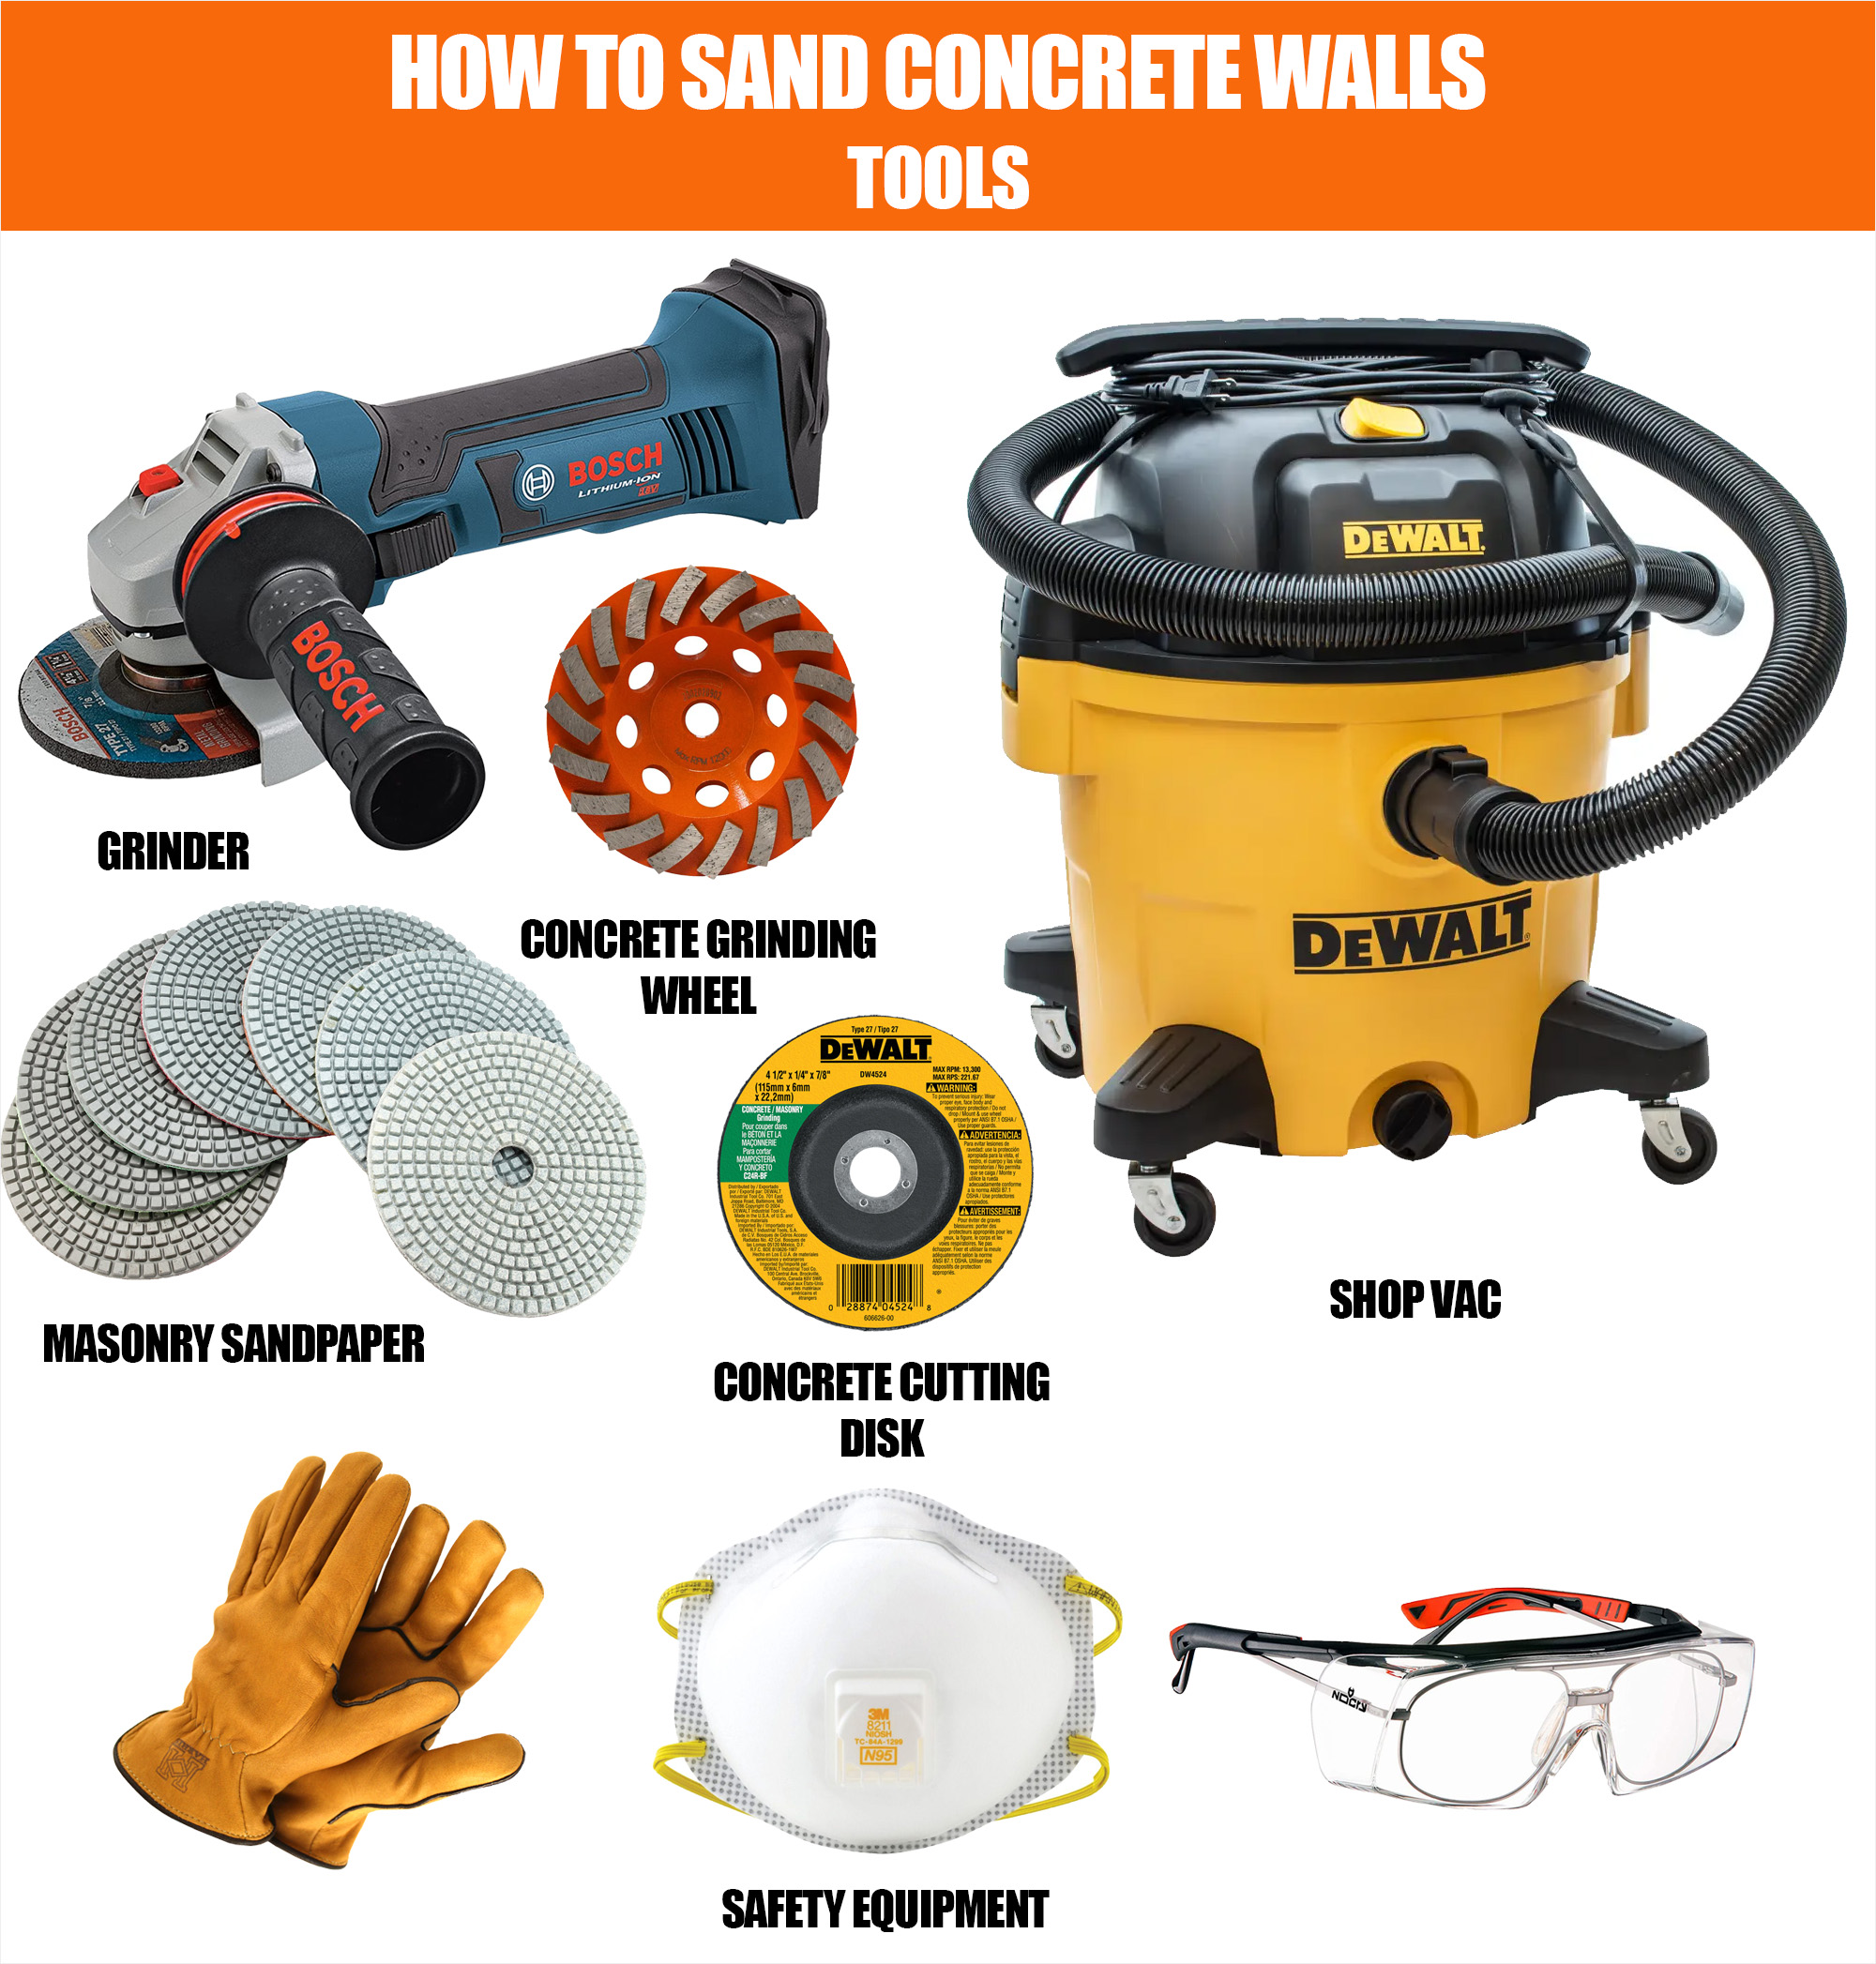 How To Sand Concrete Walls Tools Infographic chart